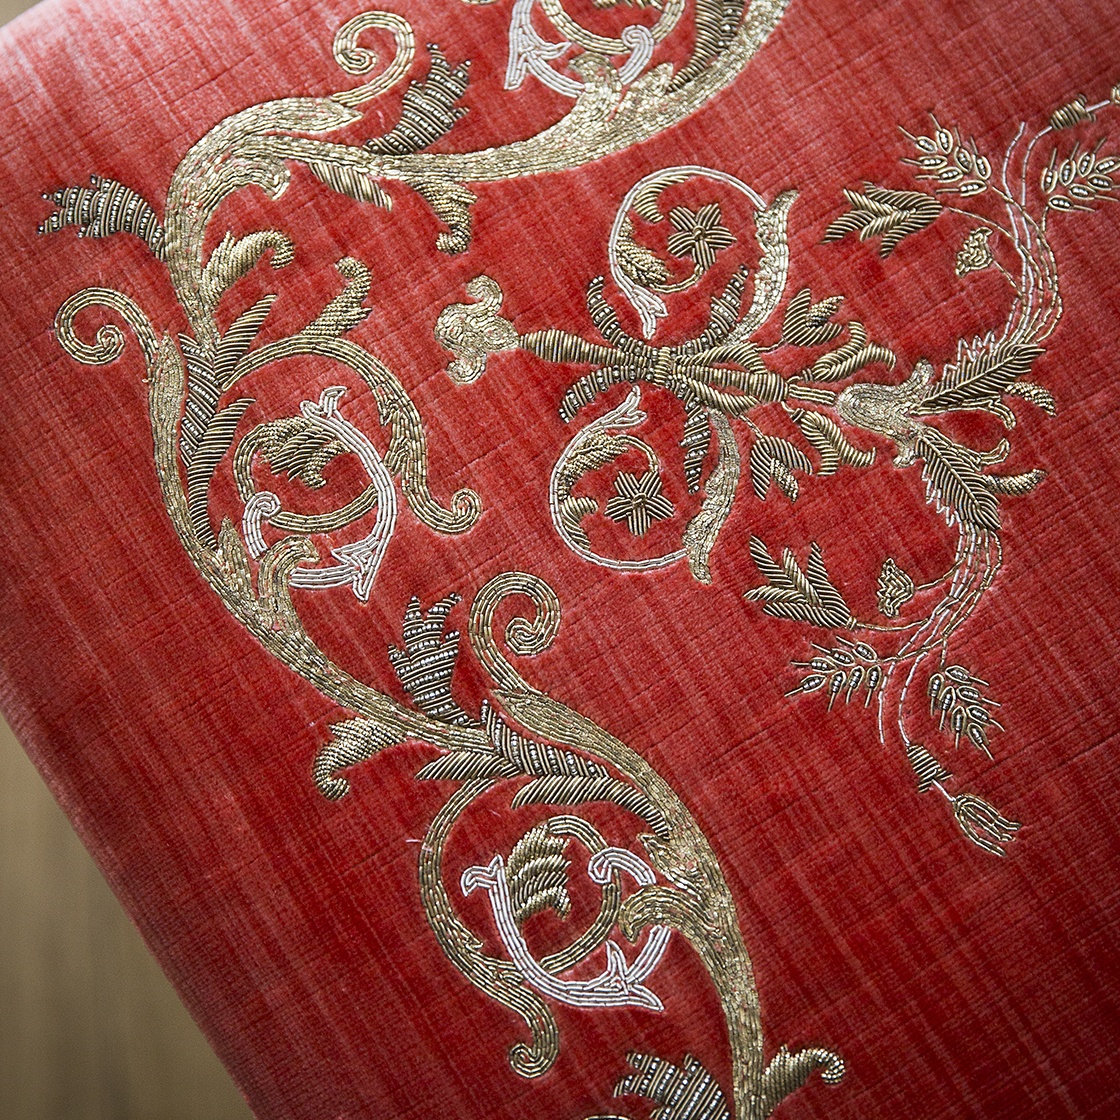 Viola embroidery on Ottoman table in Como - Pompeiian red - Beaumont & Fletcher